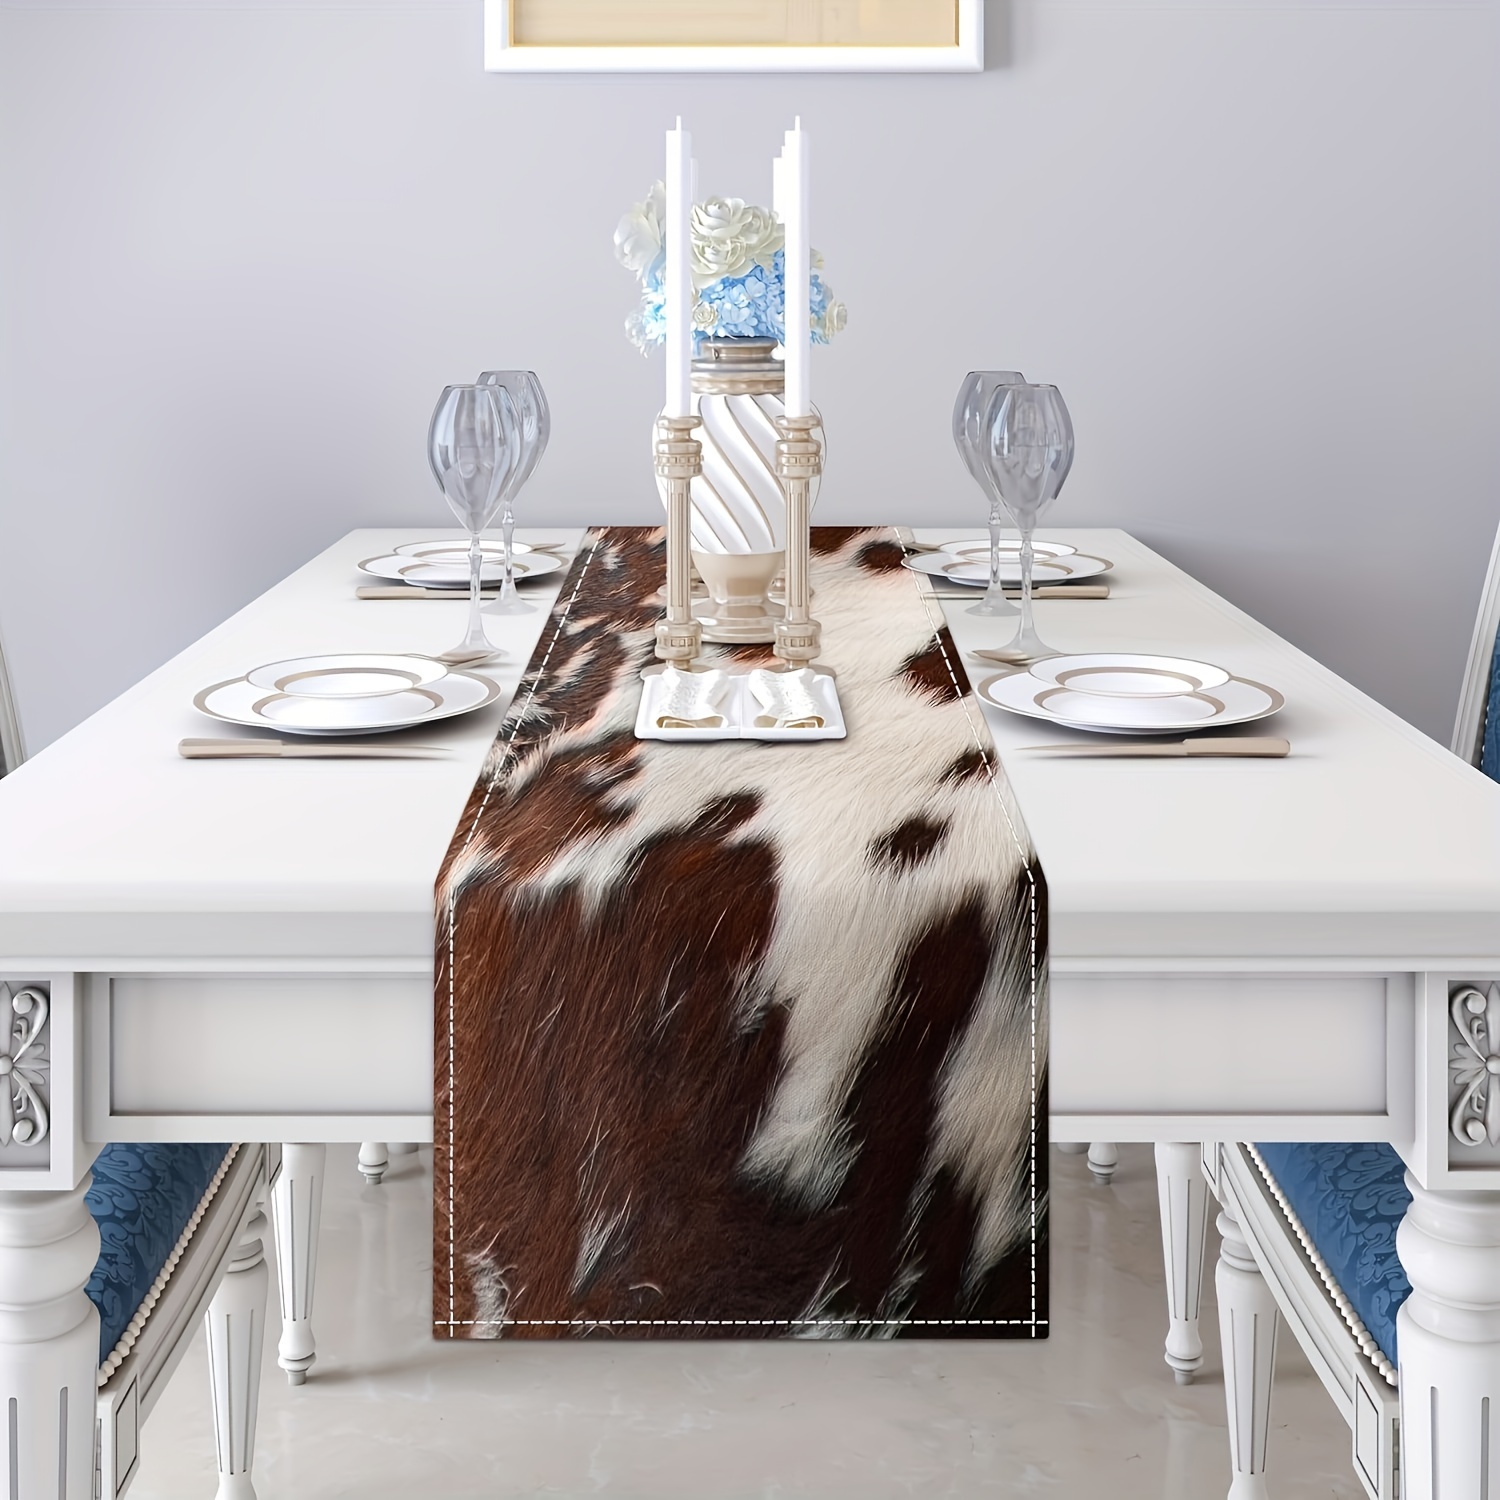 

Rustic Farmhouse Cowhide Pattern Table Runner - 100% Polyester, Woven Rectangle Design In - Perfect For Kitchen Dining Decor